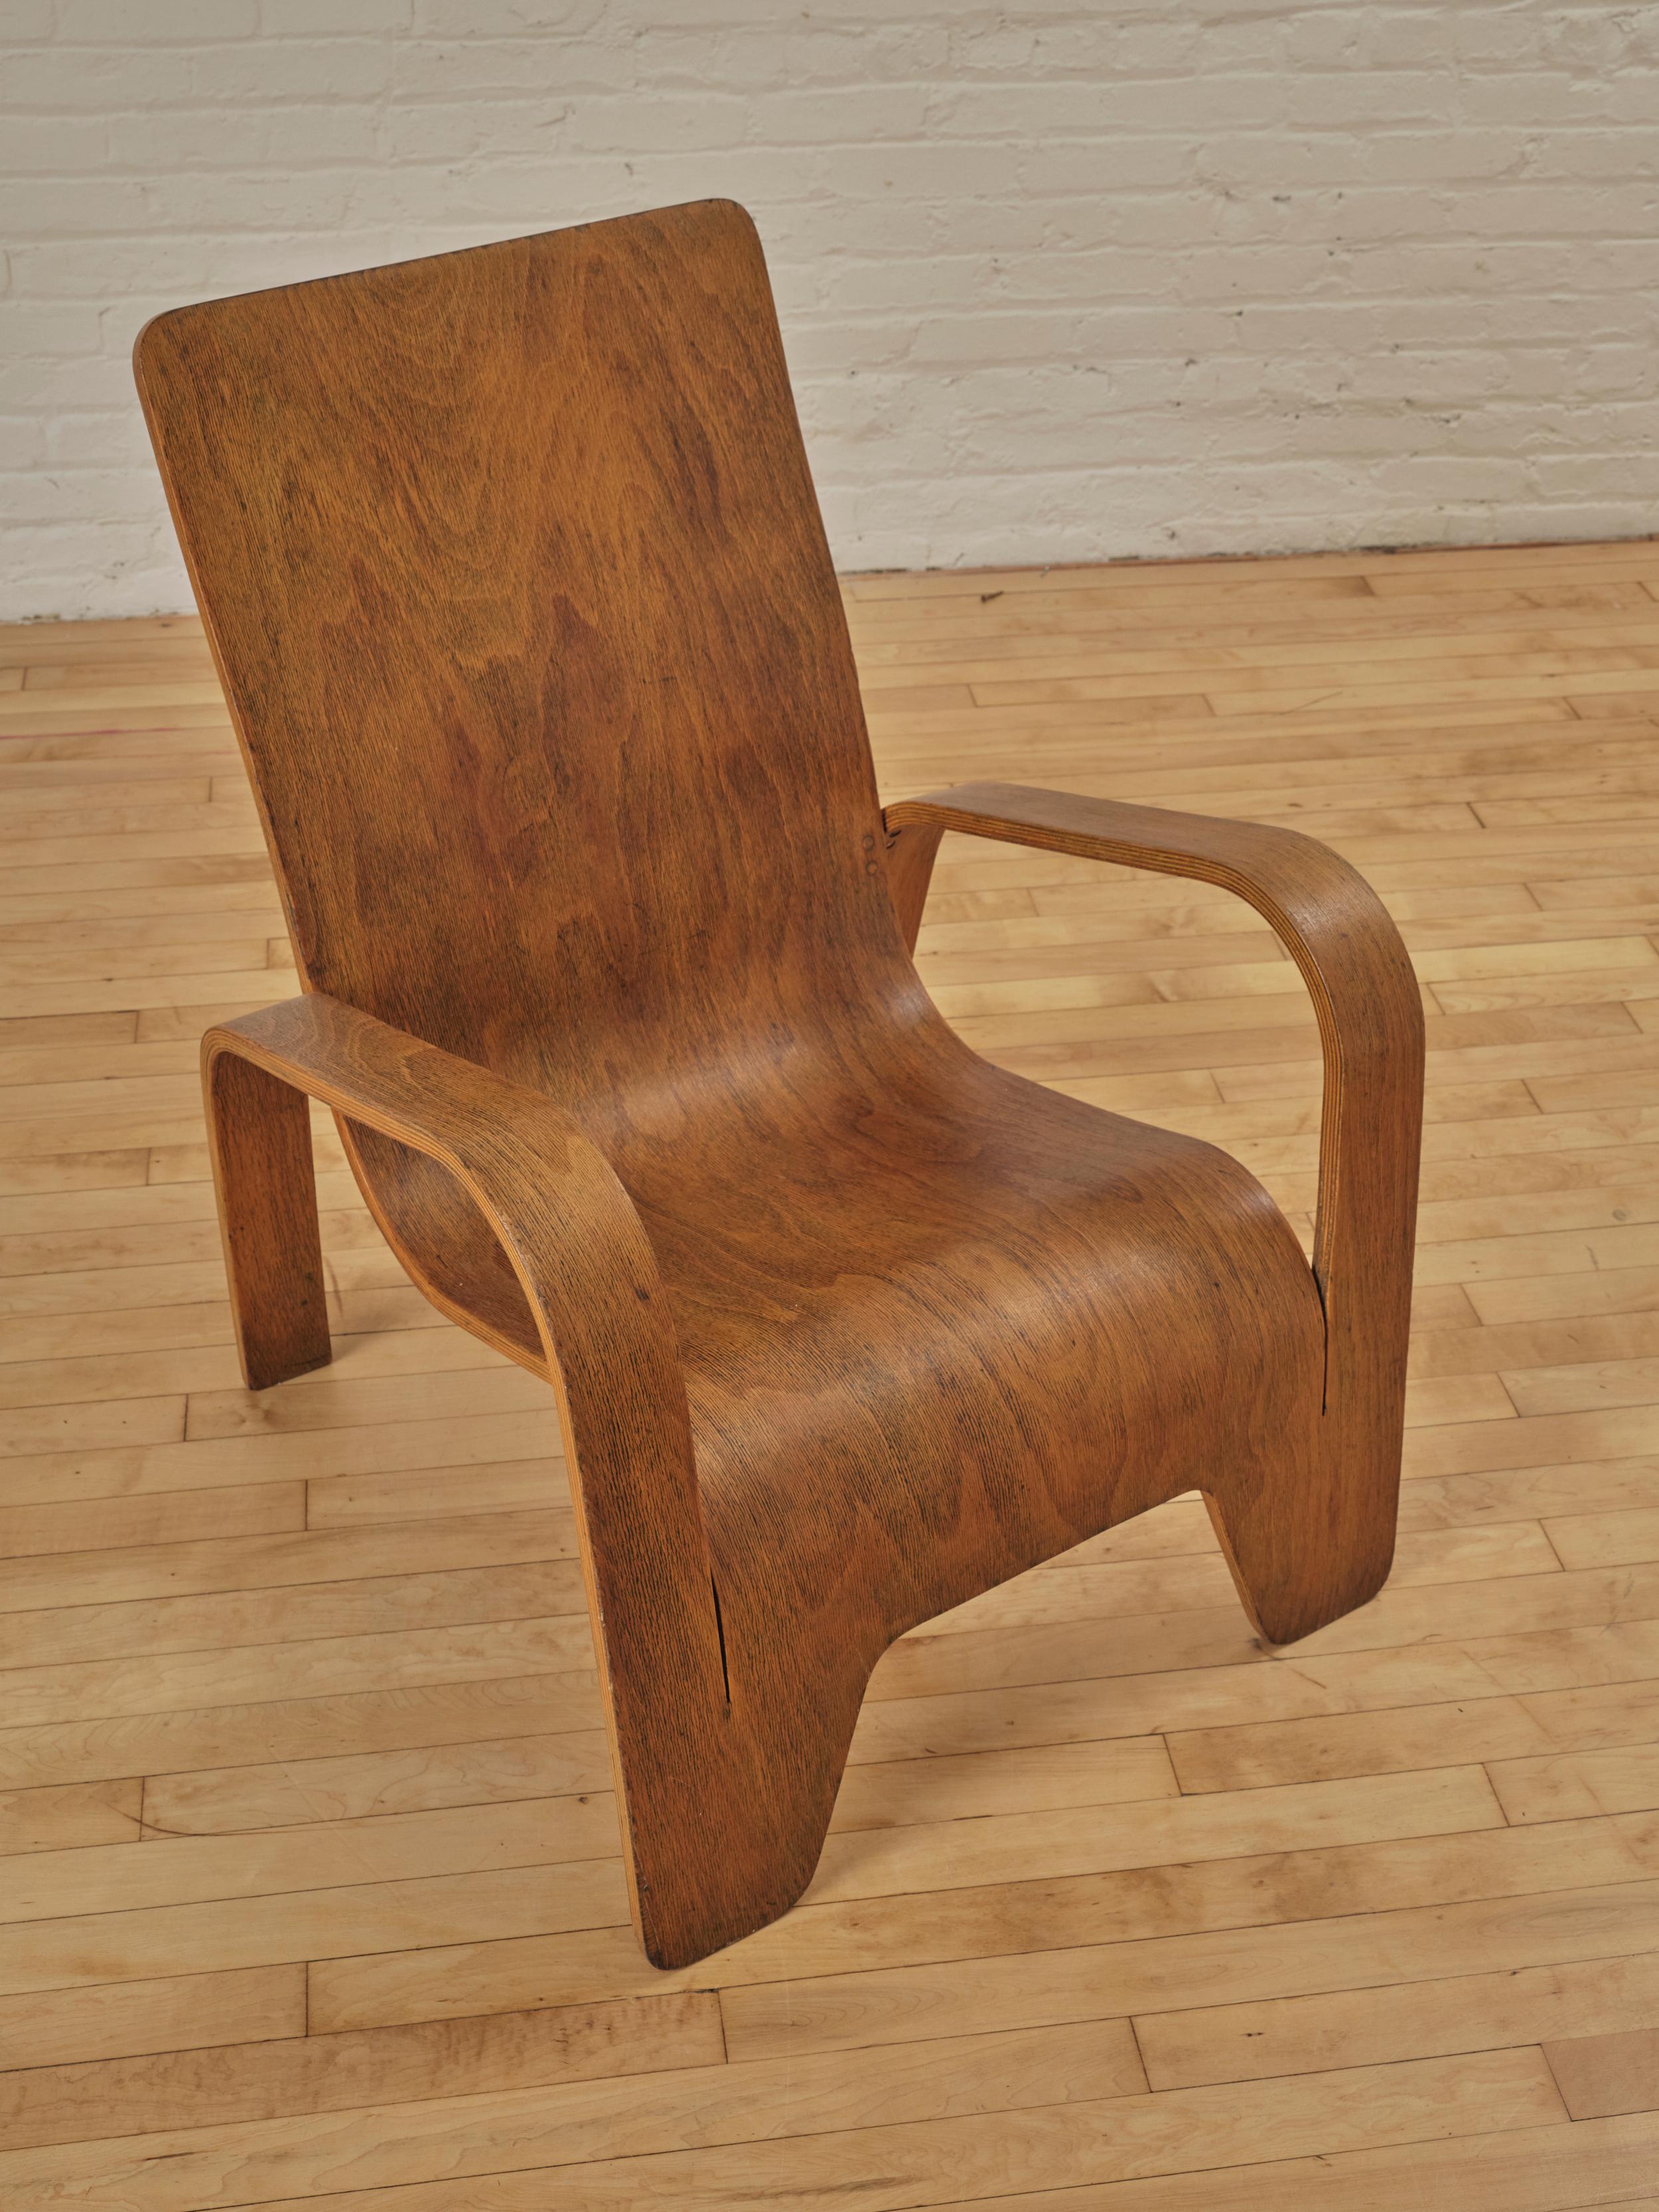  LaWo1 Wooden Lounge Chair by Han Pieck for Lawo Ommen For Sale 2